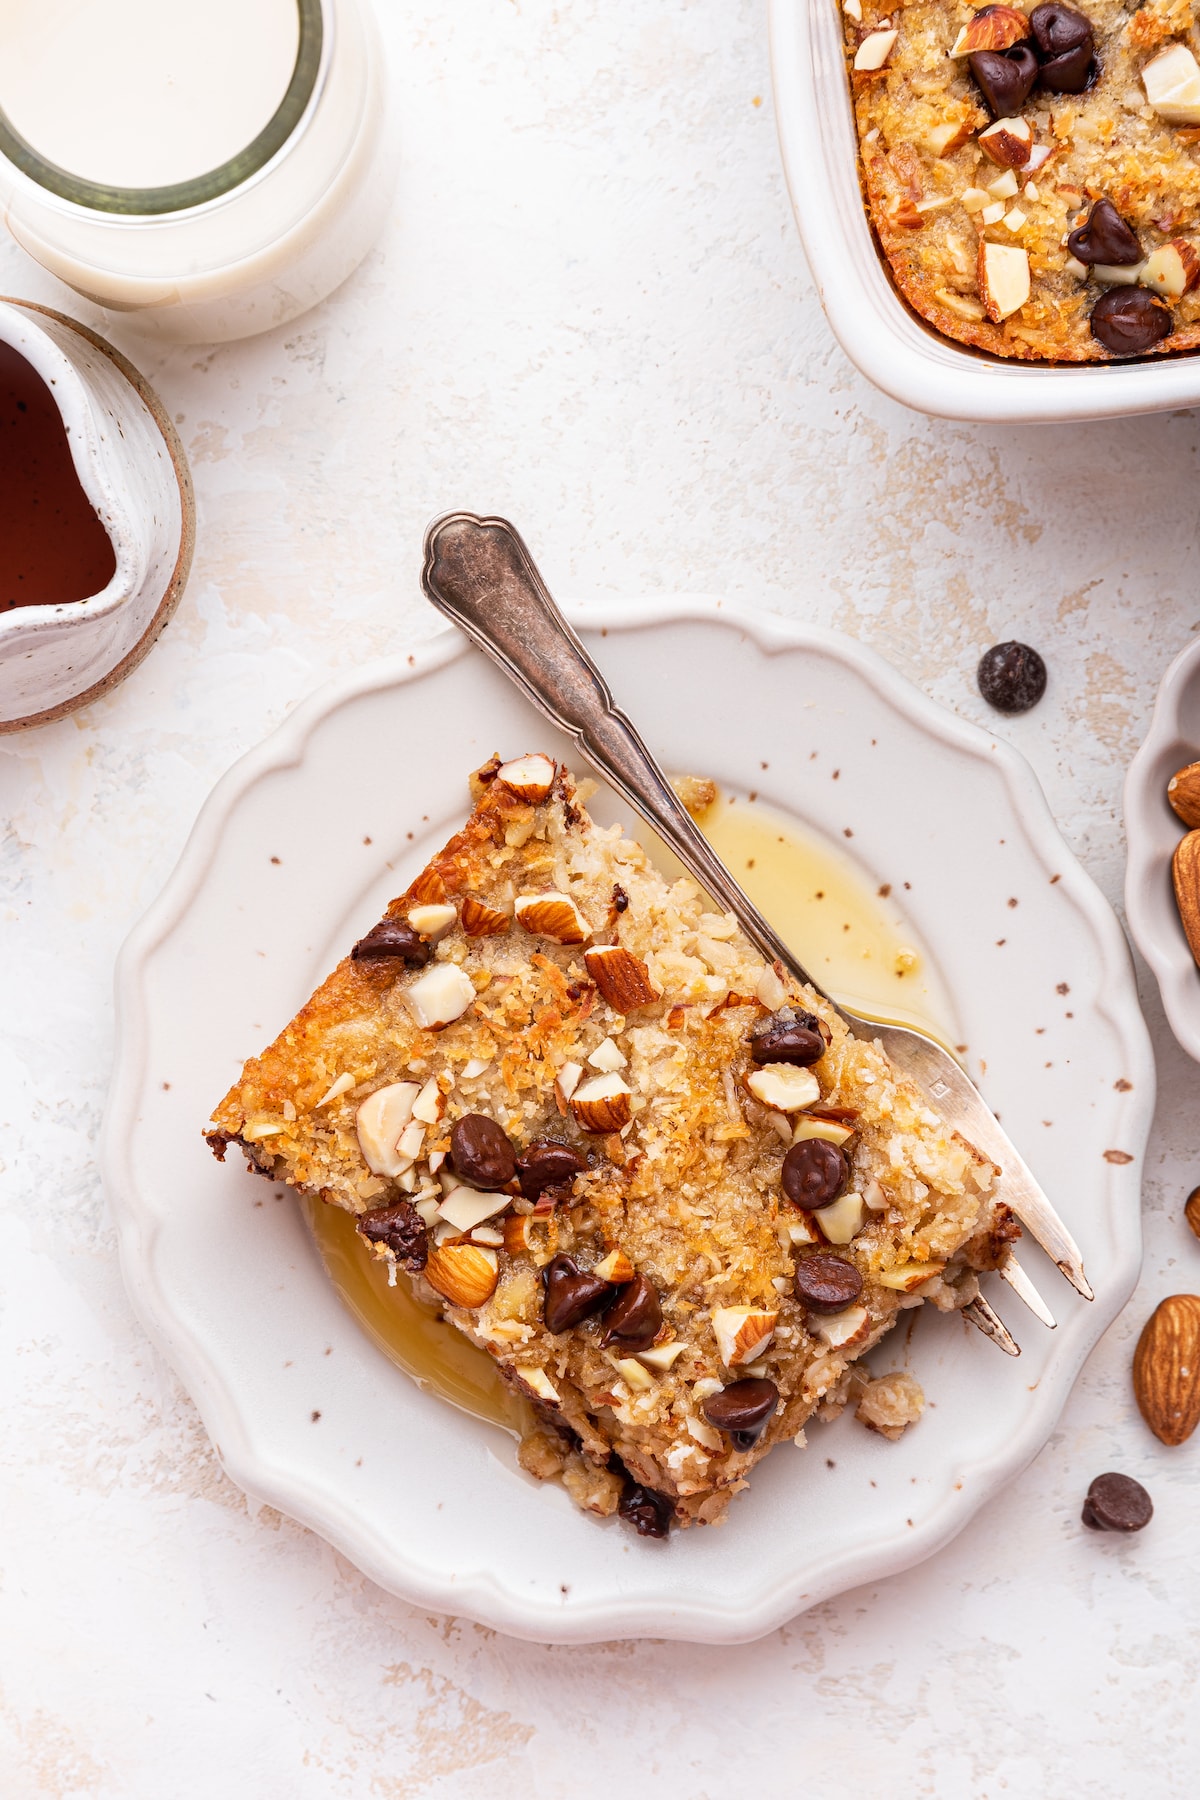 A serving of almond joy baked oatmeal on a small plate with maple syrup and a metal fork.